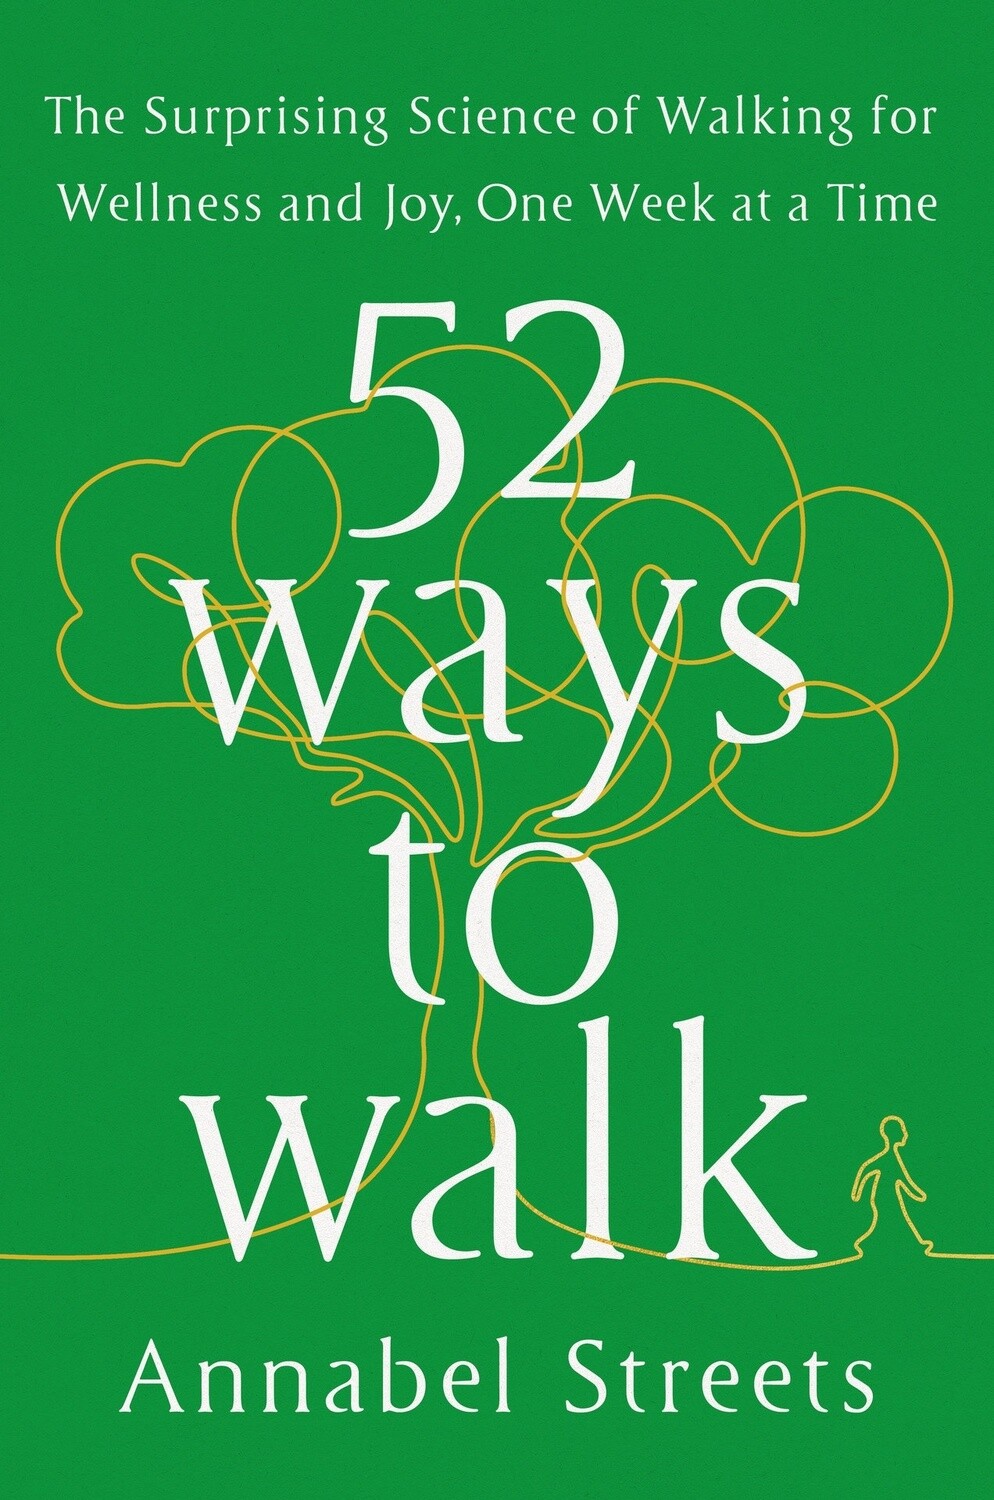 52 Ways to Walk: The Surprising Science of Walking for Wellness and Joy, One Week at a Time (Hardcover)